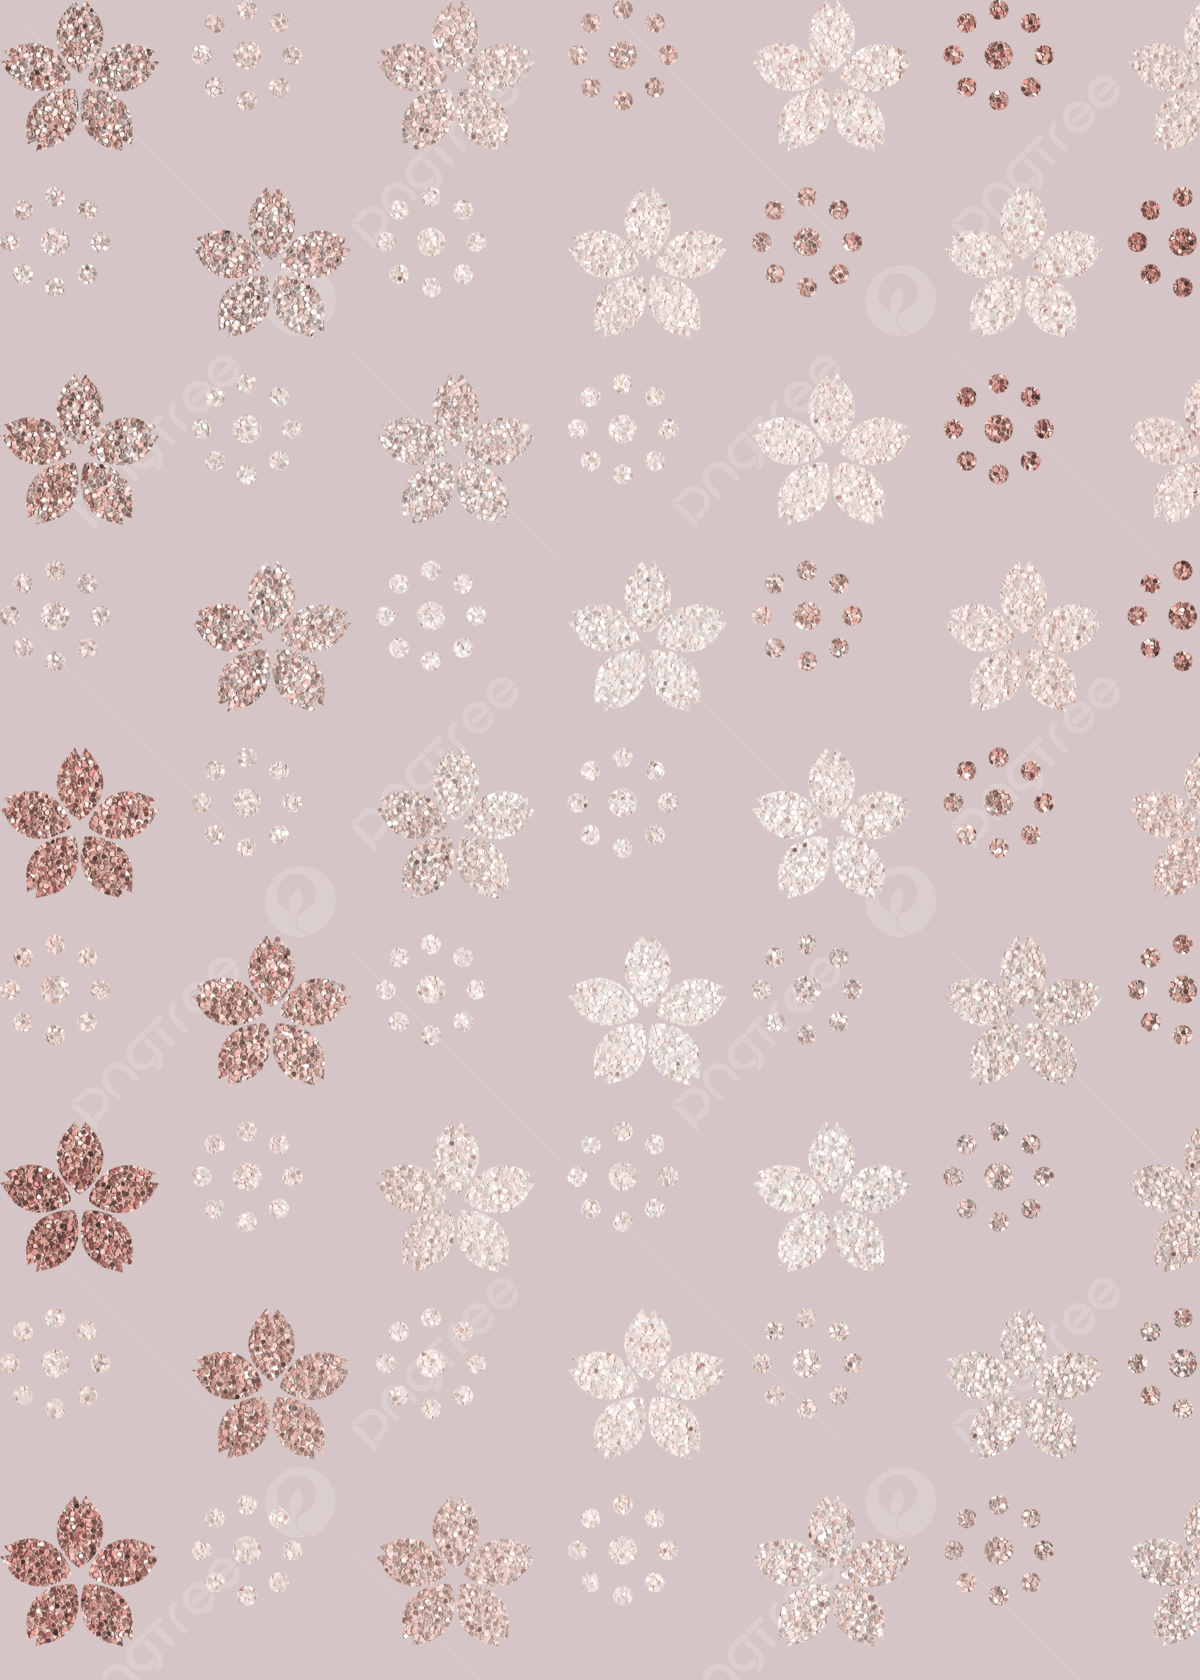 Rose Gold Glitter Background Image, HD Picture and Wallpaper For Free Download